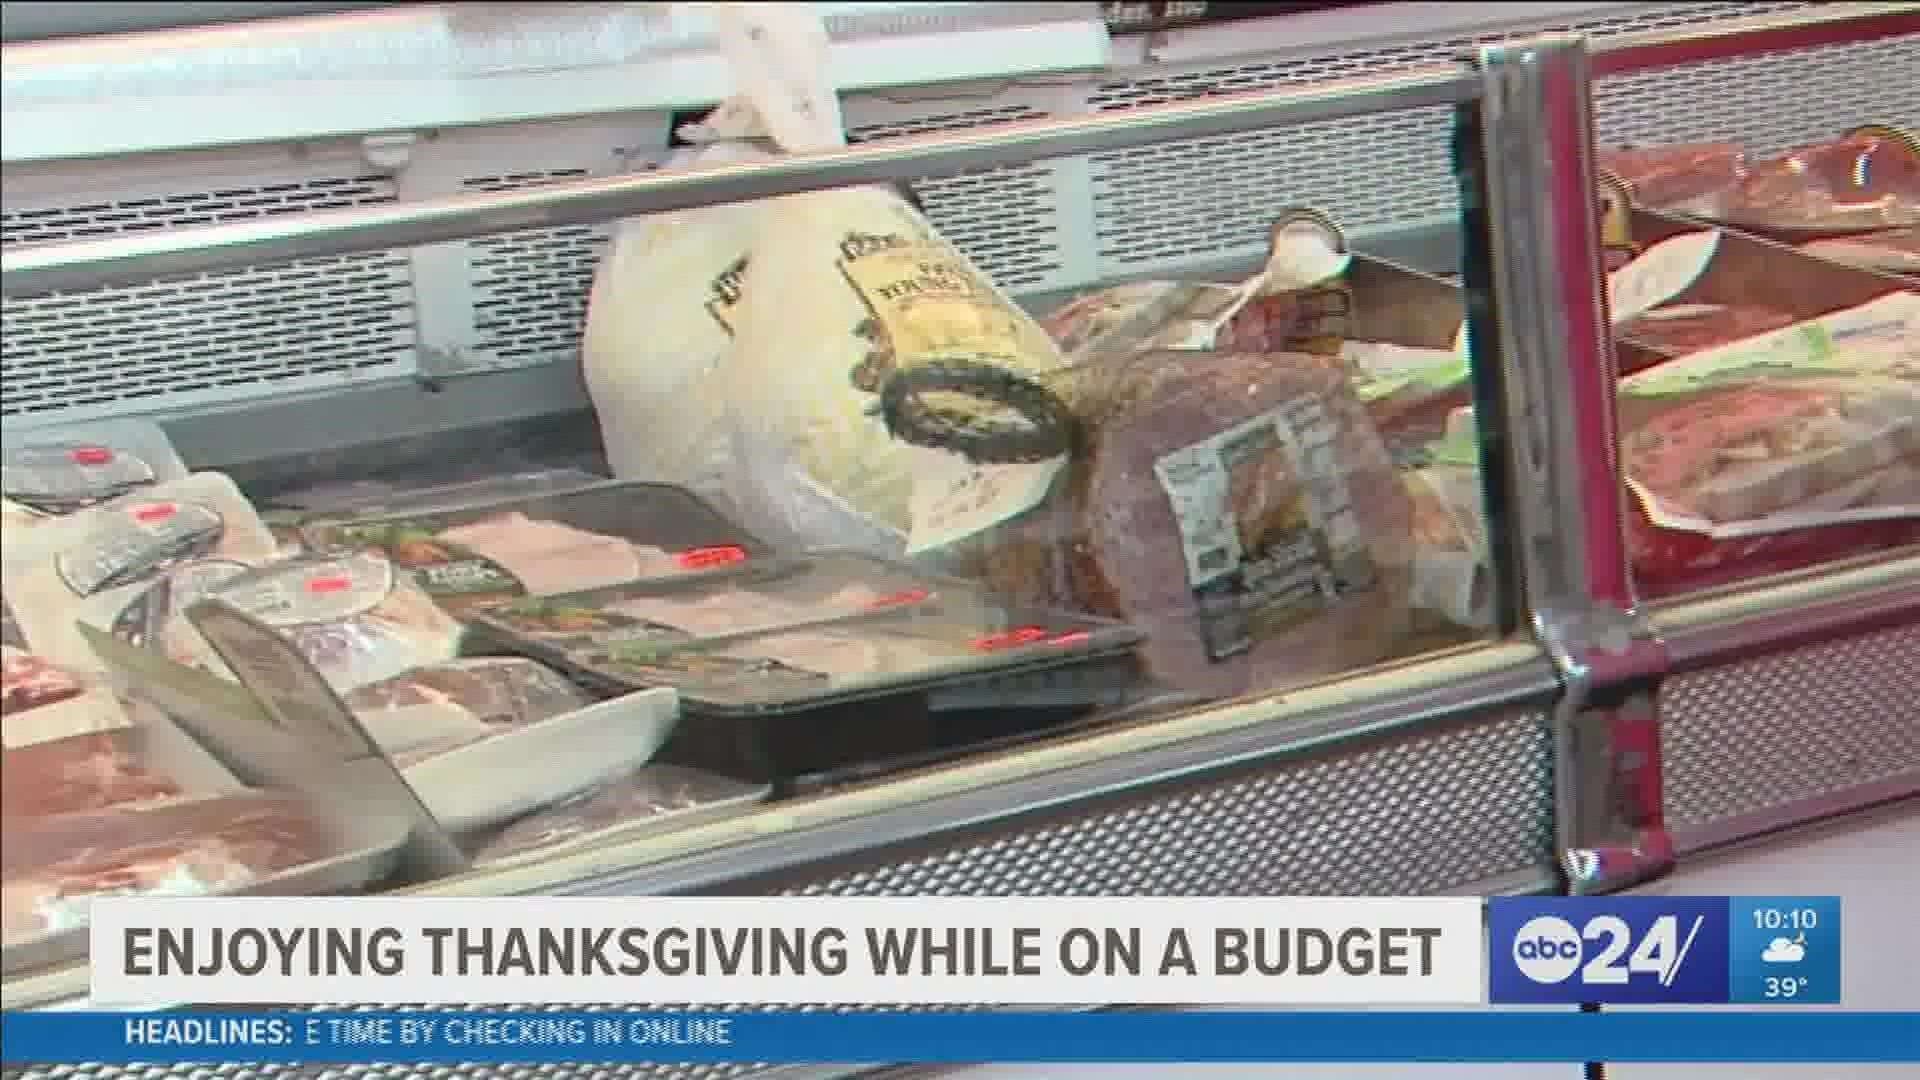 Amid rising prices as the country struggles with a supply shortage, shoppers are hunting for the best holiday food deals.